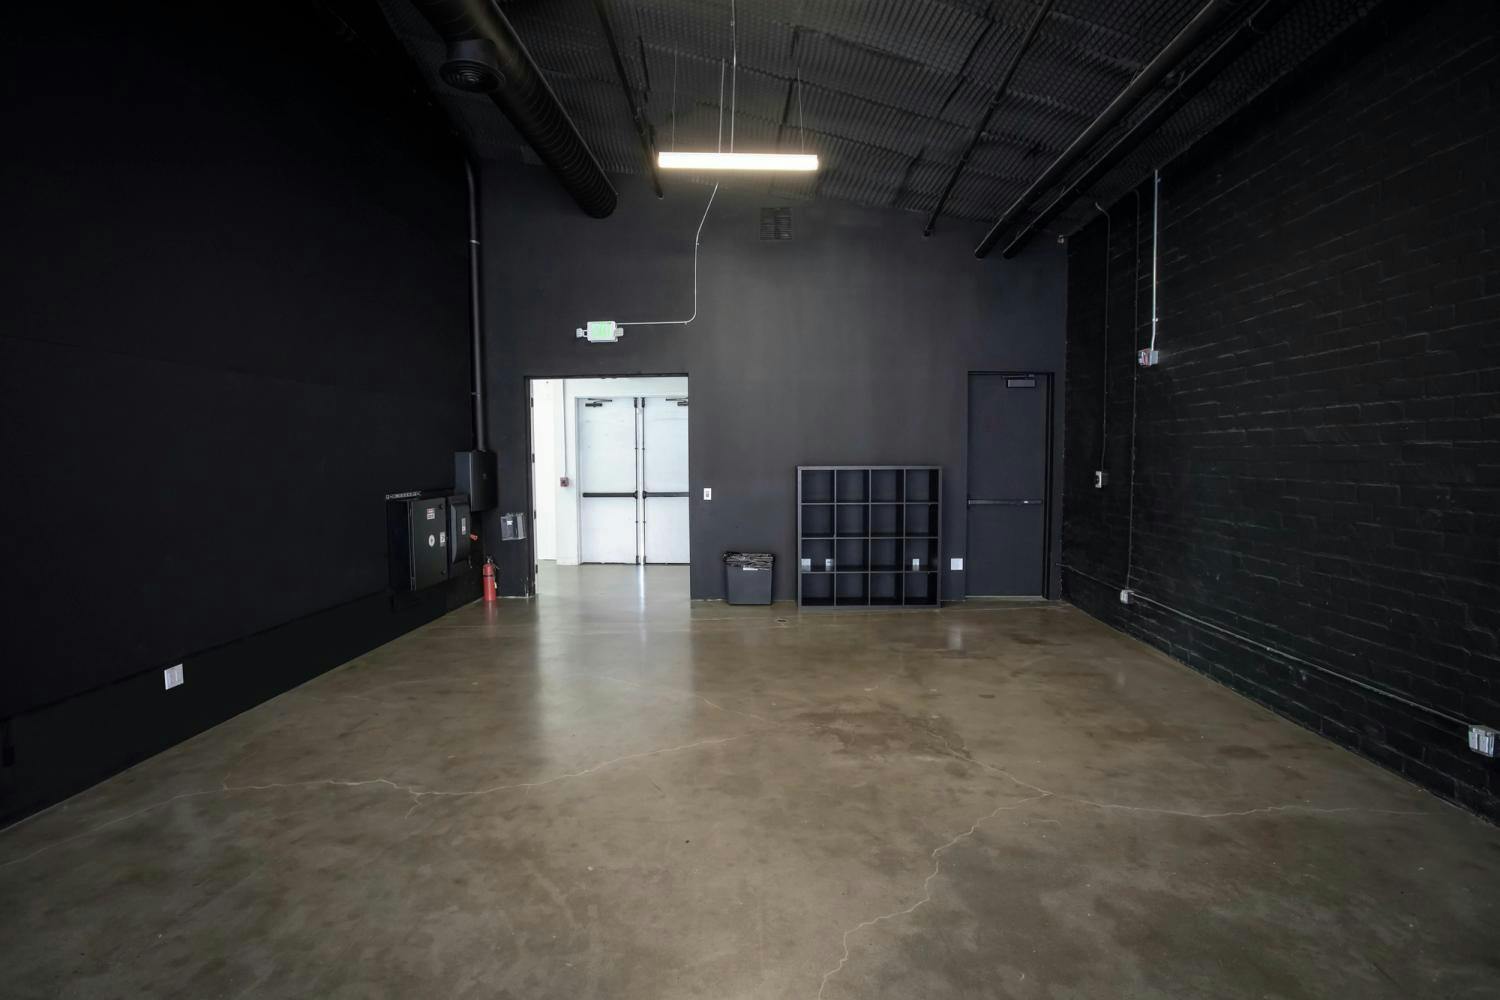 An empty corner of a studio showing black walls, concrete flooring, a storage cubby, and the entryway with industrial-style ceiling and lighting.